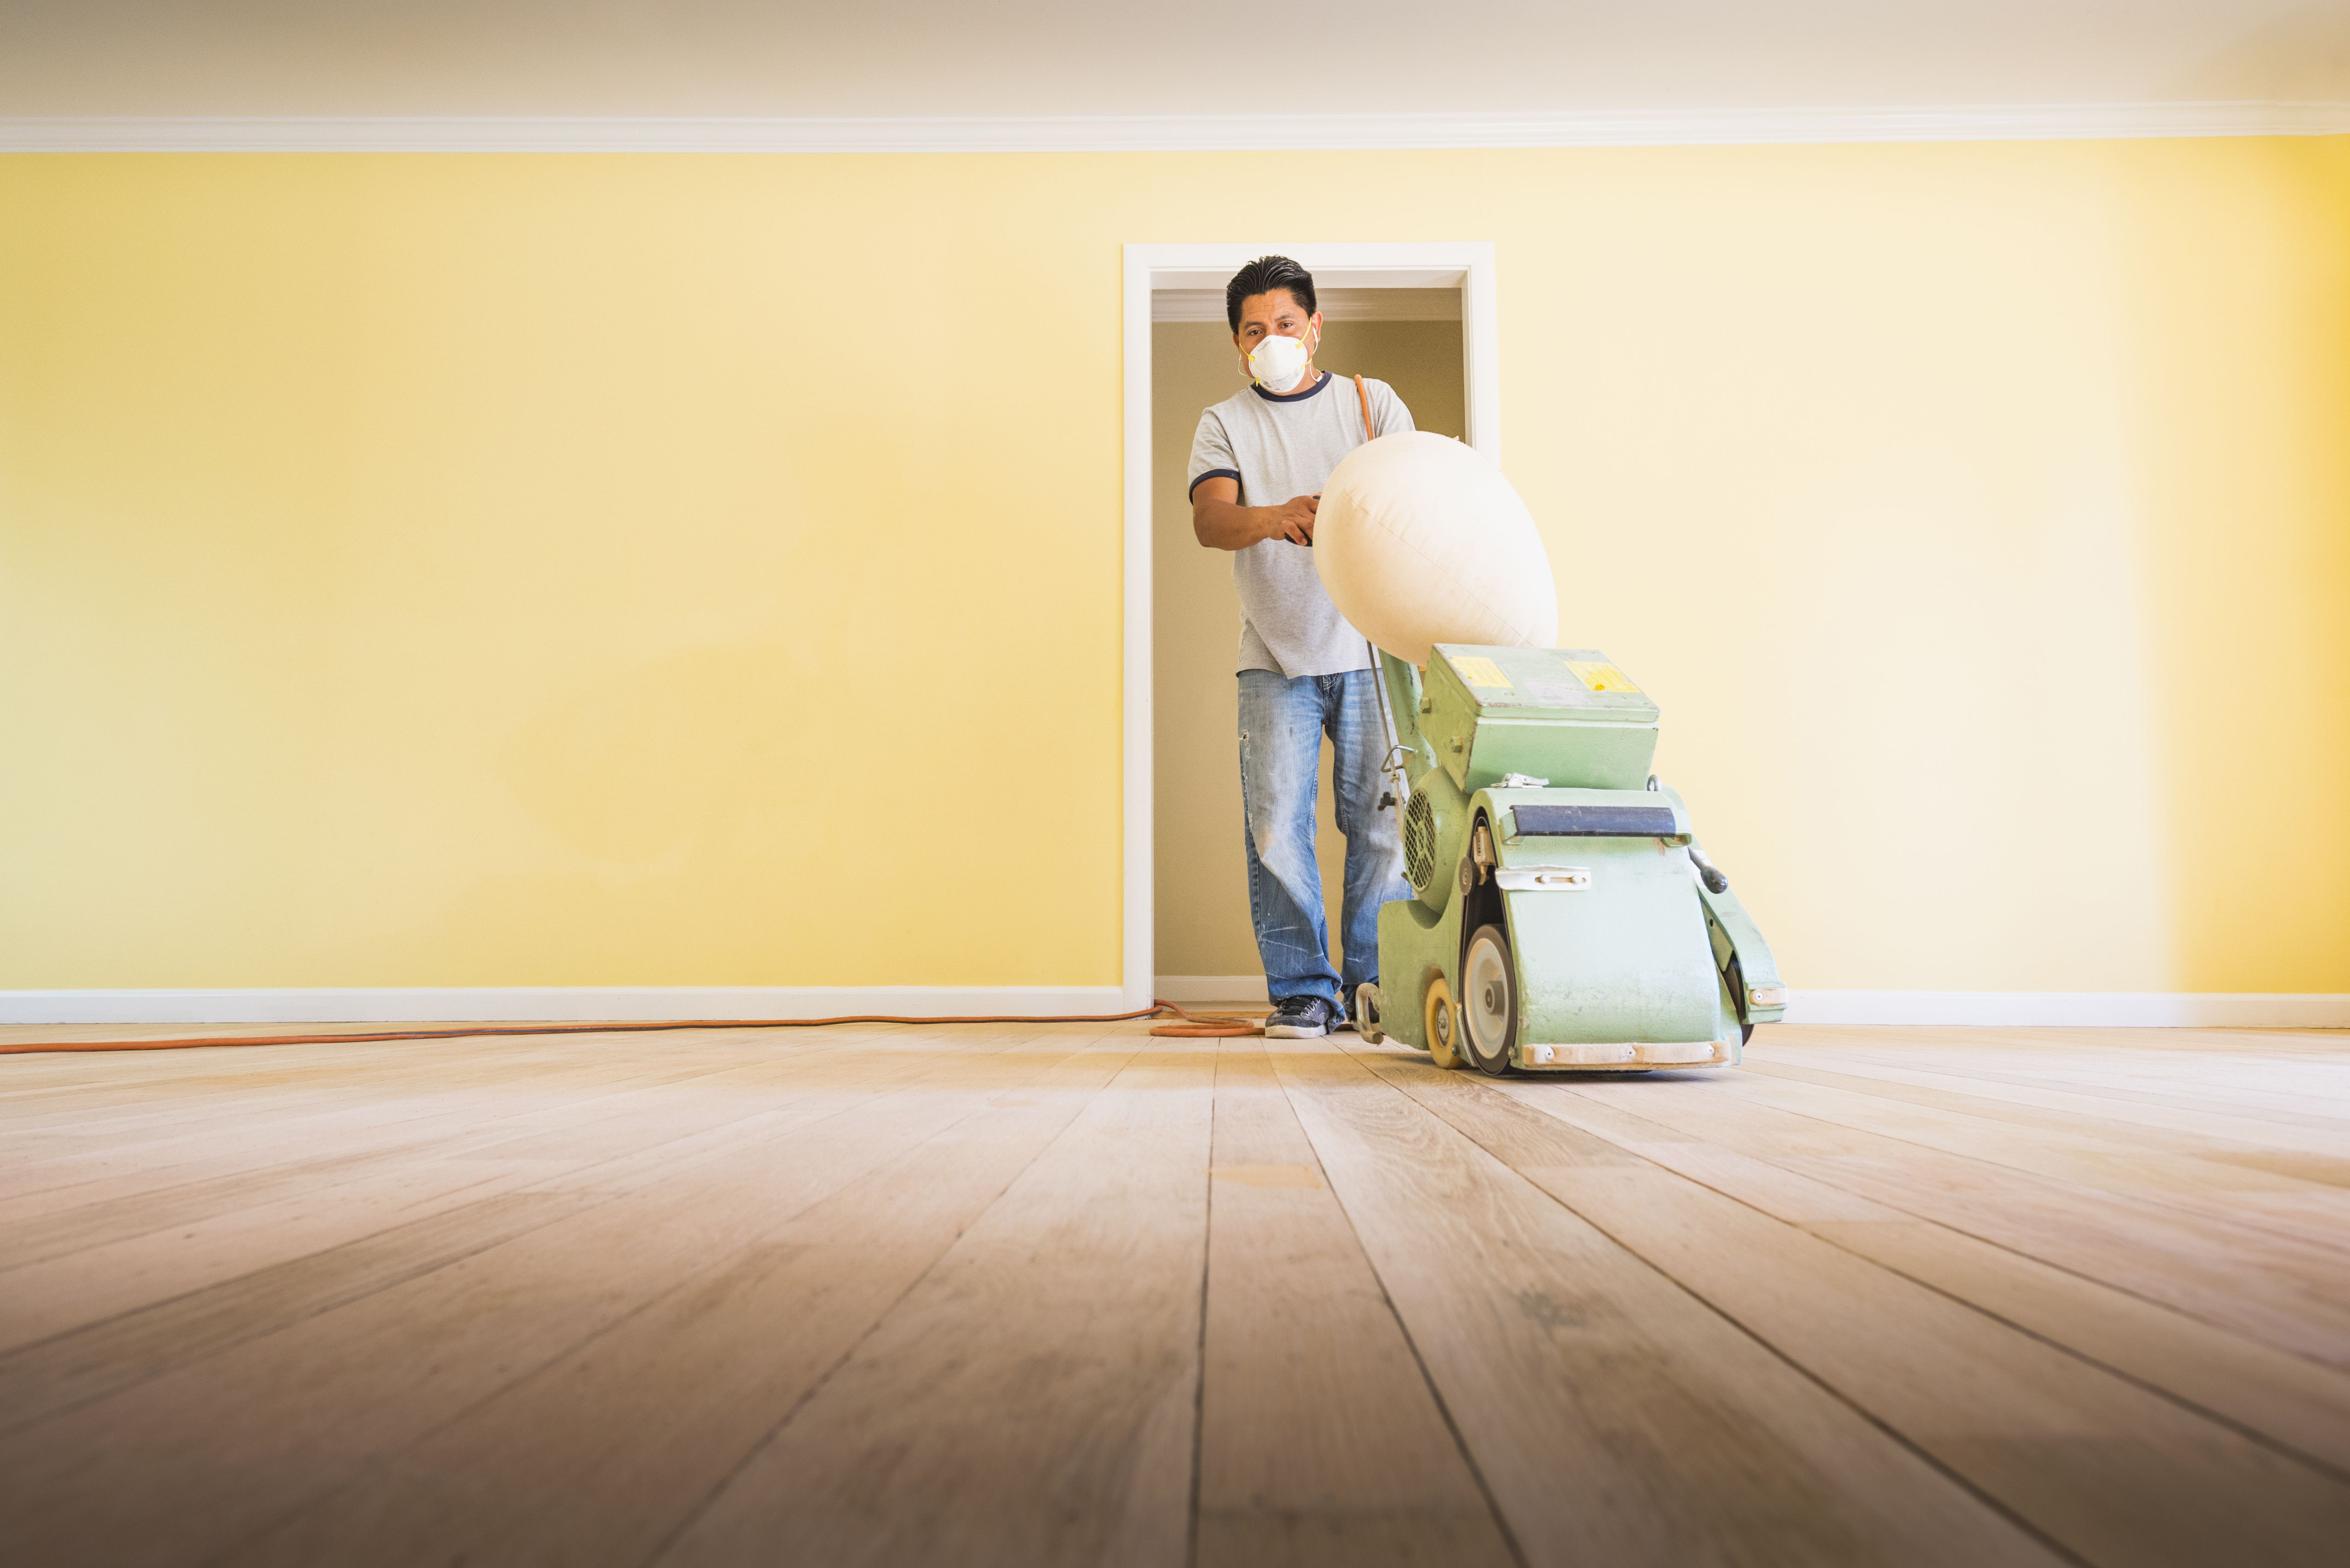 23 Awesome How Long Does Refinishing Hardwood Floors Take 2024 free download how long does refinishing hardwood floors take of should you paint walls or refinish floors first inside floorsandingafterpainting 5a8f08dfae9ab80037d9d878